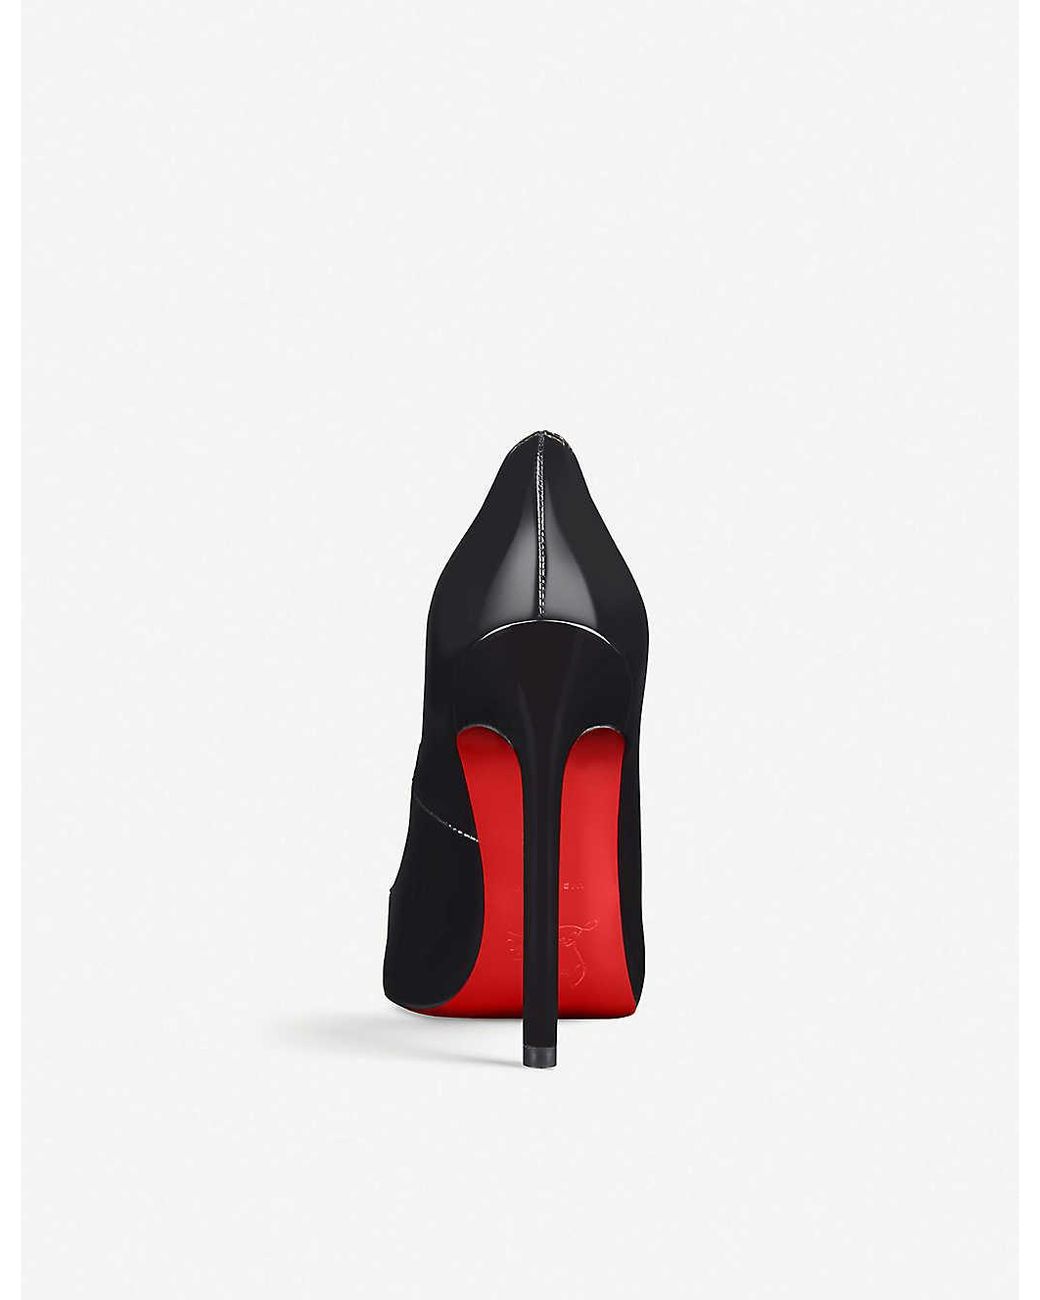 Christian Louboutin Pigalle 120 Patent Calf in Black | Lyst